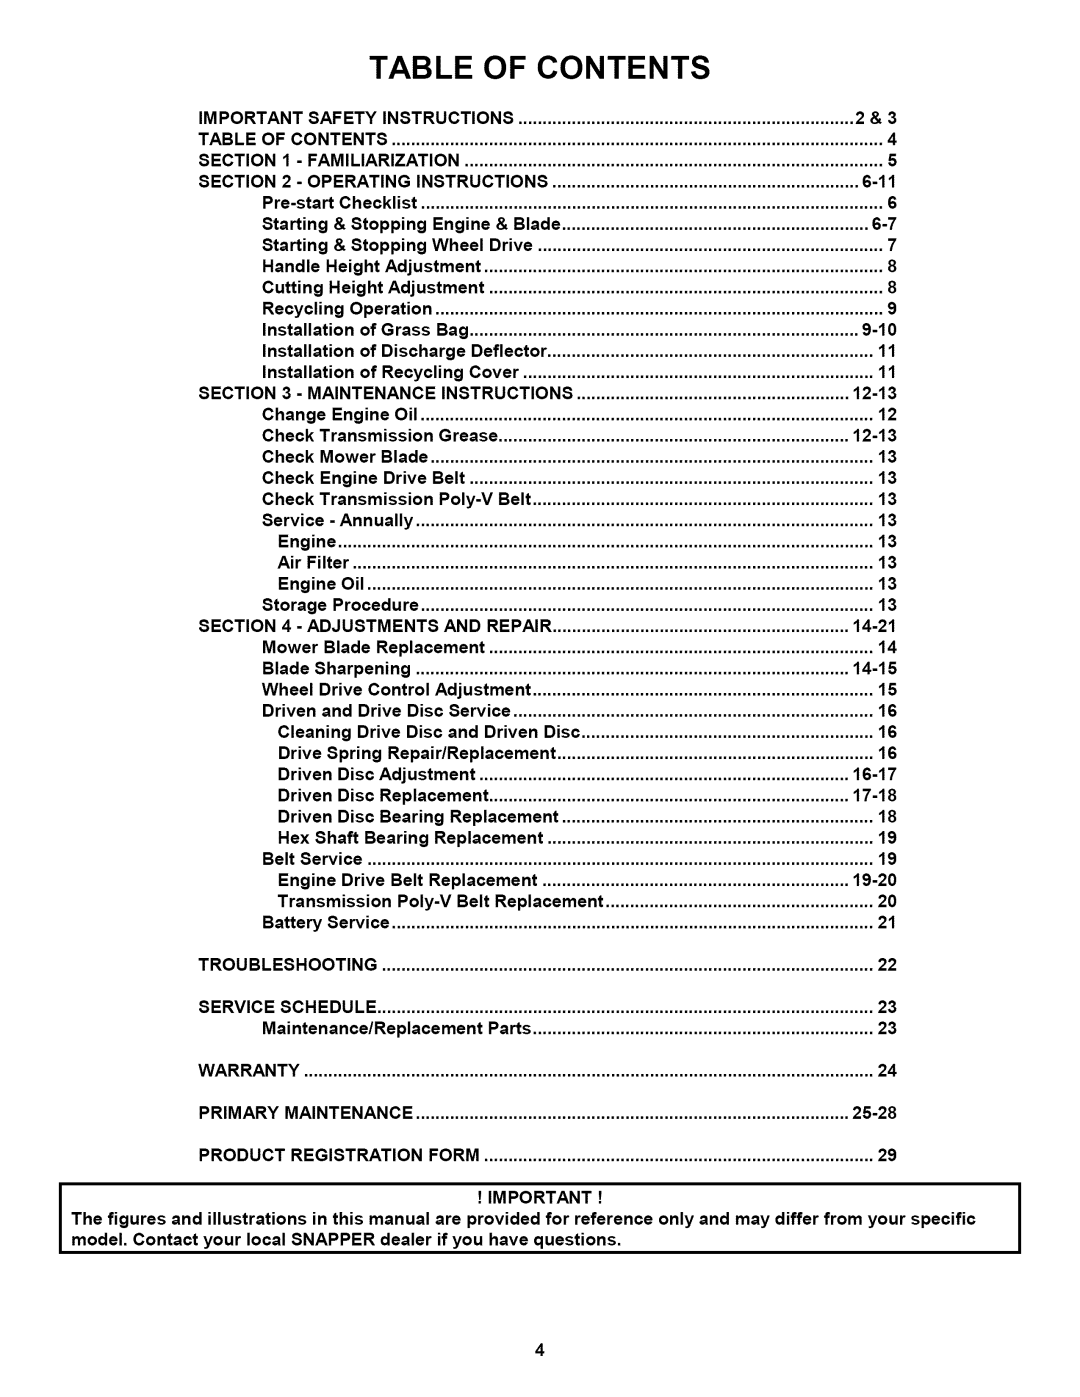 Snapper P2167517BVE, WP216517B important safety instructions Table, Of Contents 